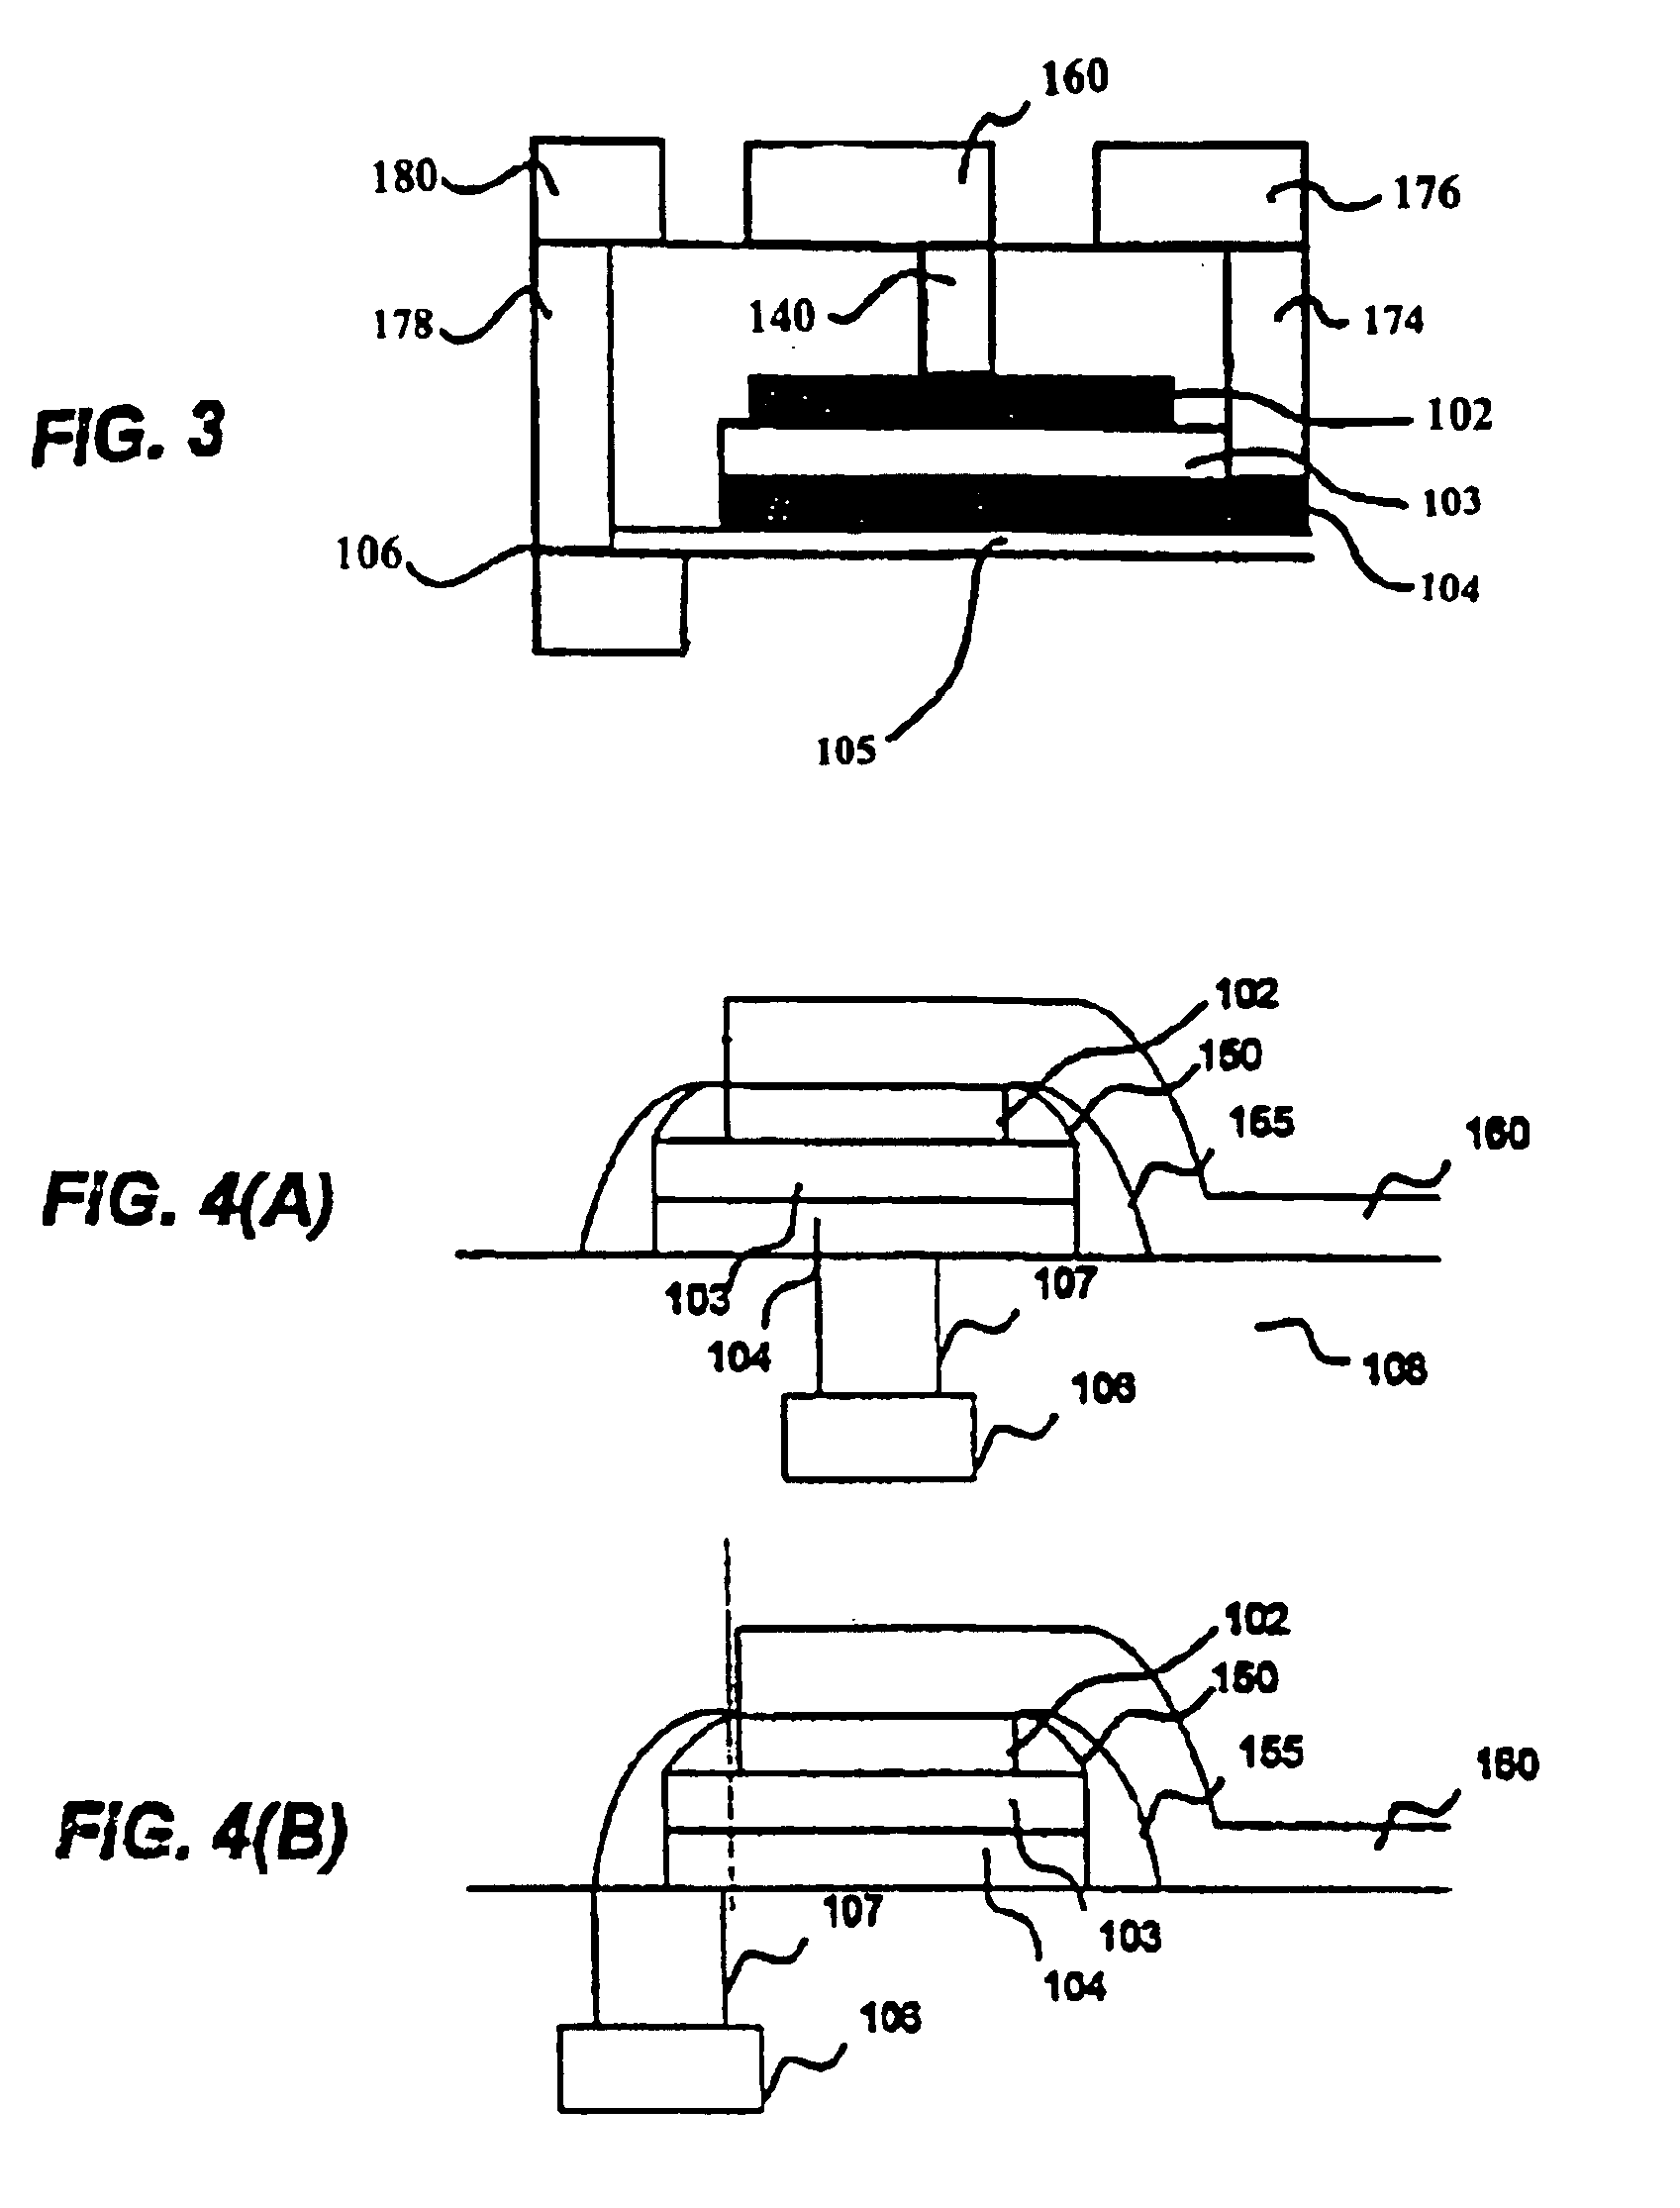 One-mask metal-insulator-metal capacitor and method for forming same